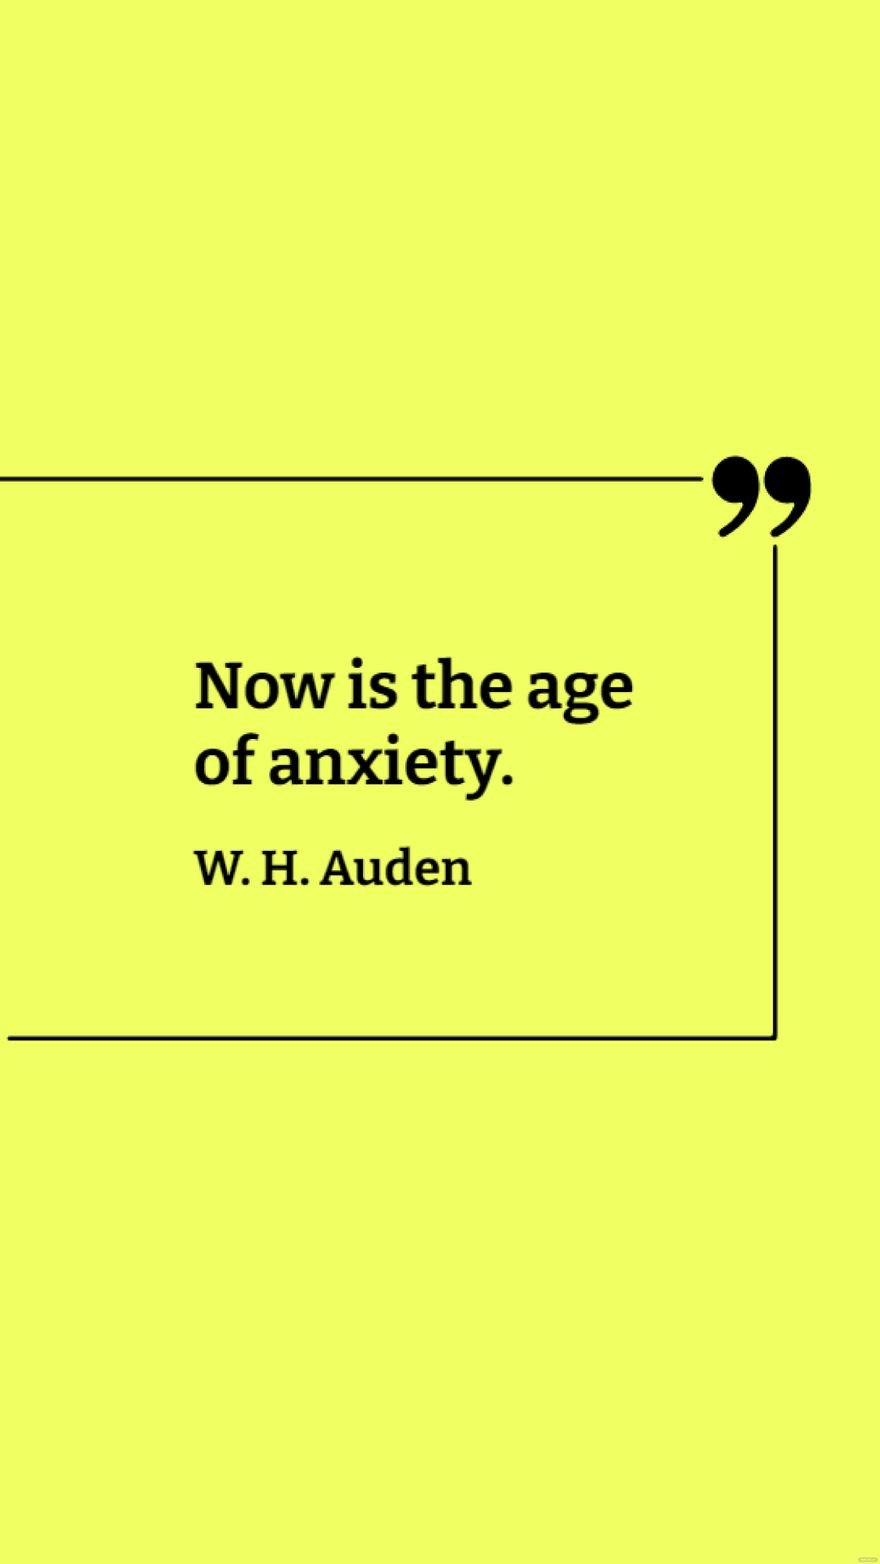 W. H. Auden - Now is the age of anxiety.